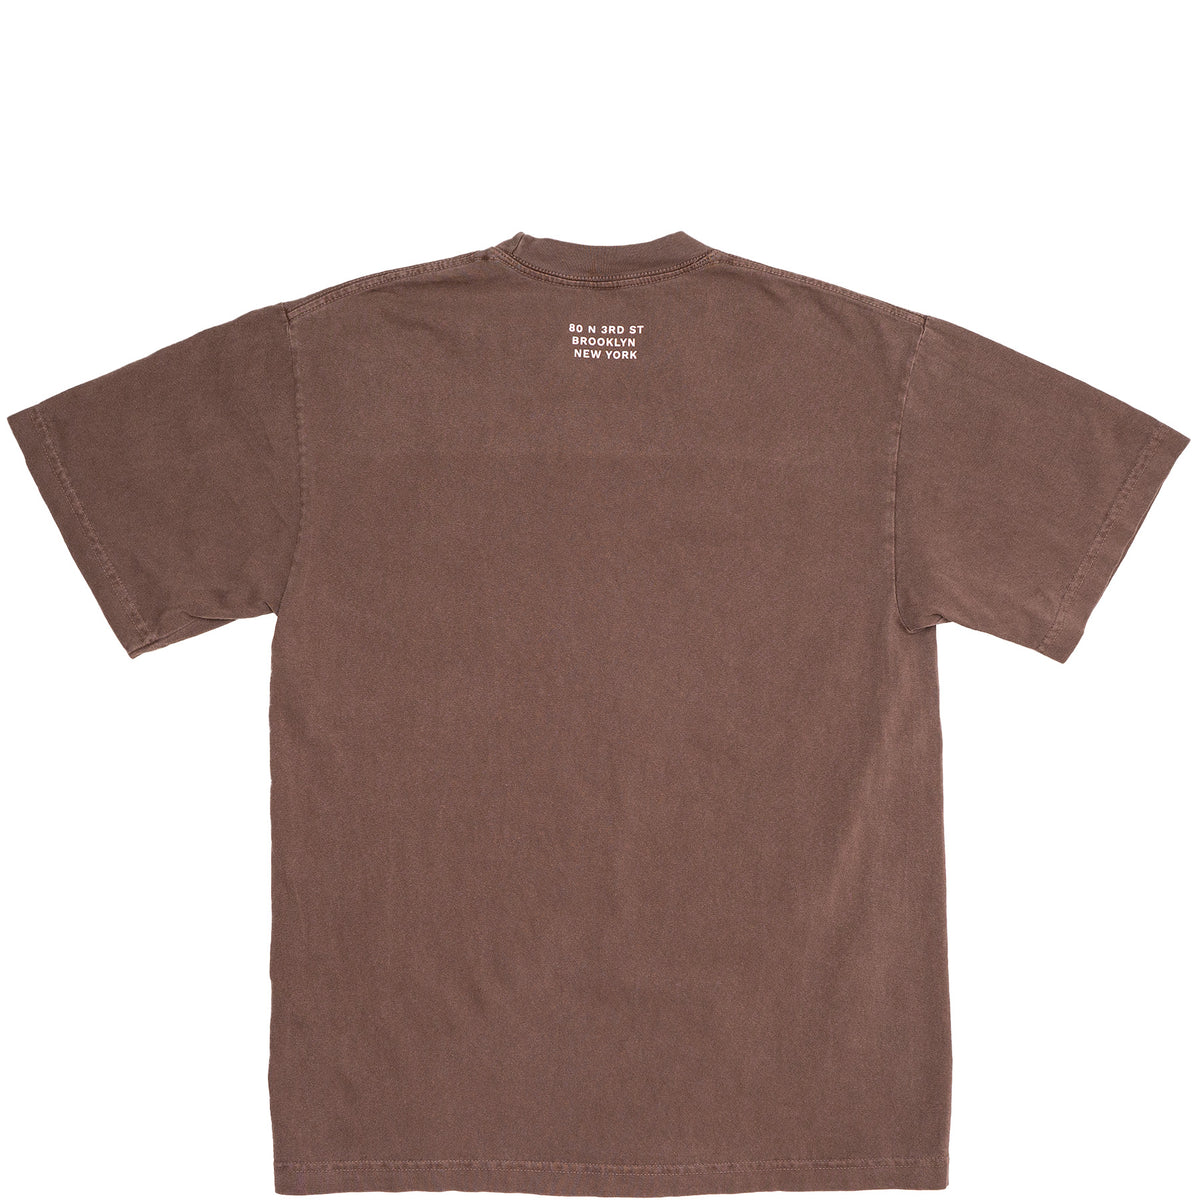 KCDC - Shop Tee - Clove, Forest Green &amp; White